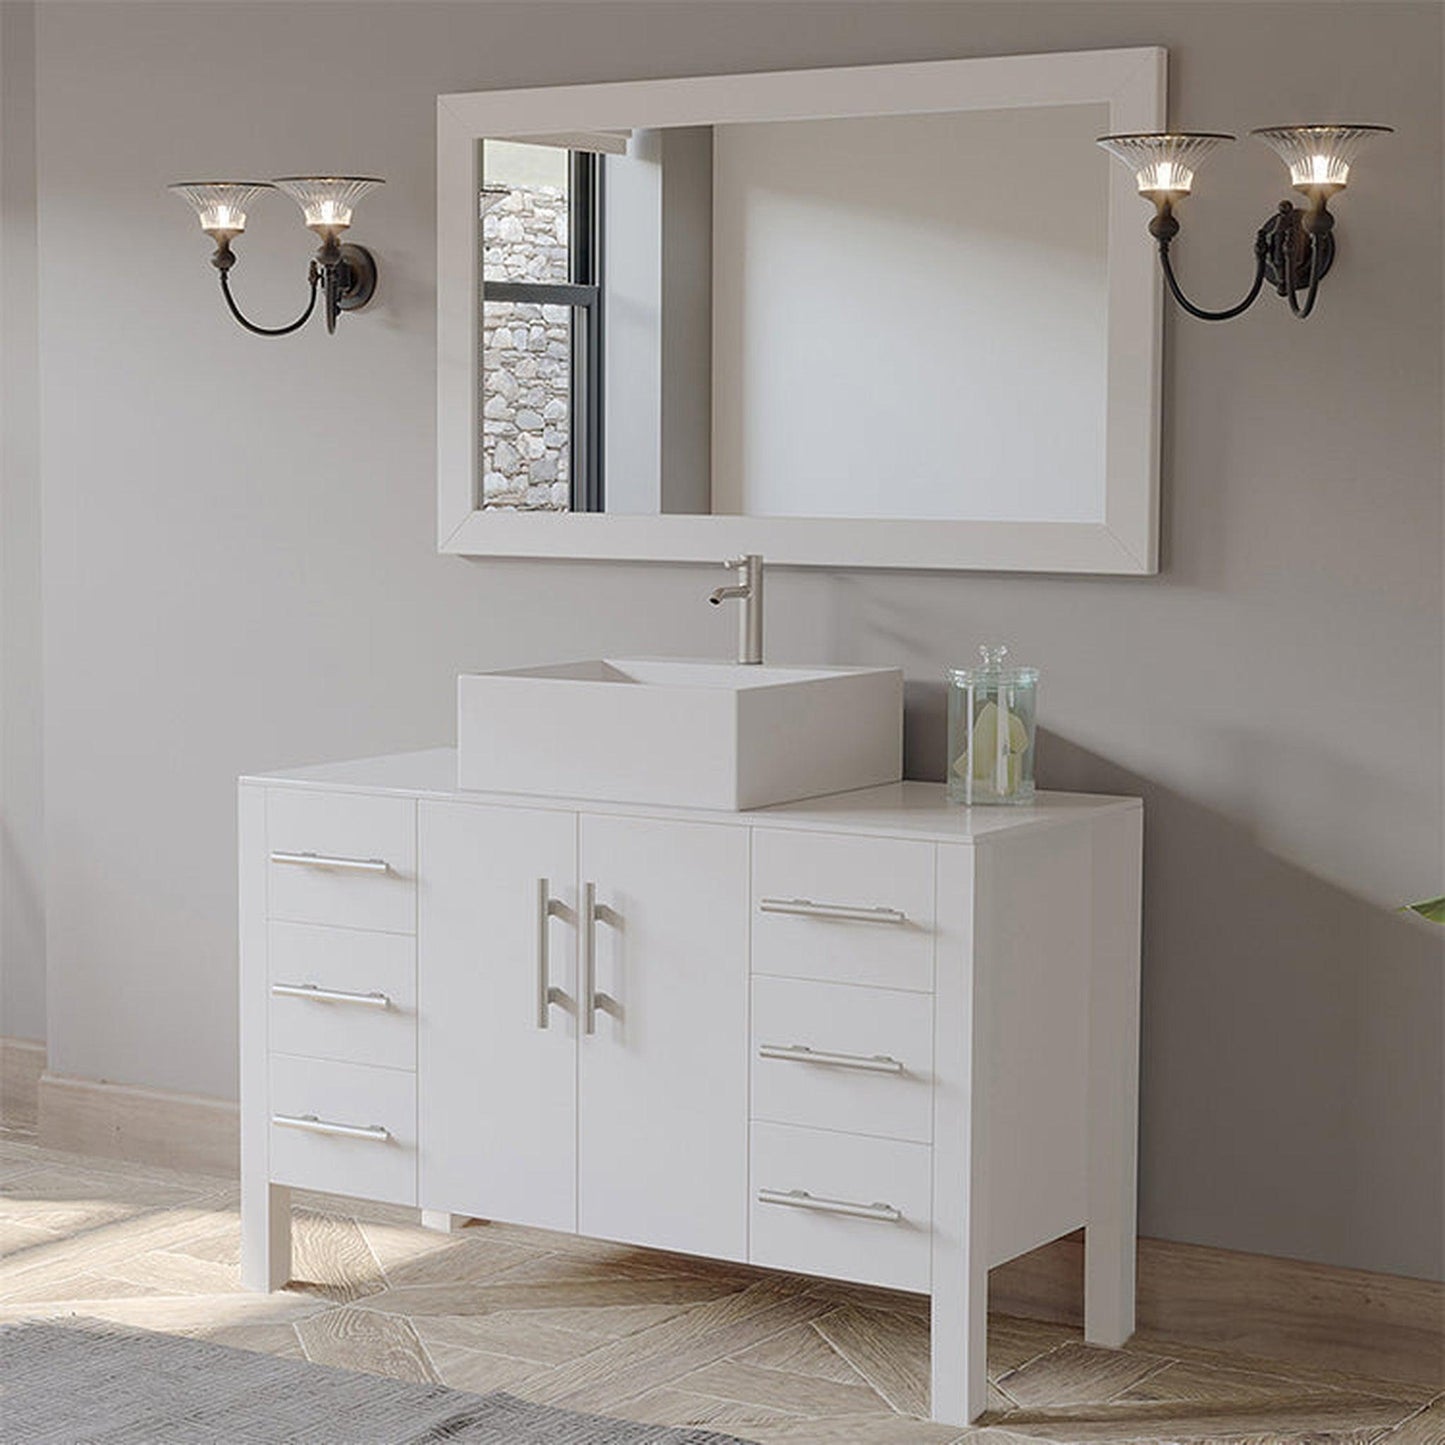 Cambridge Plumbing 48" White Wood Single Vanity Set With Porcelain Countertop And Square Vessel Sink With Faucet Hole And Polished Chrome Plumbing Finish